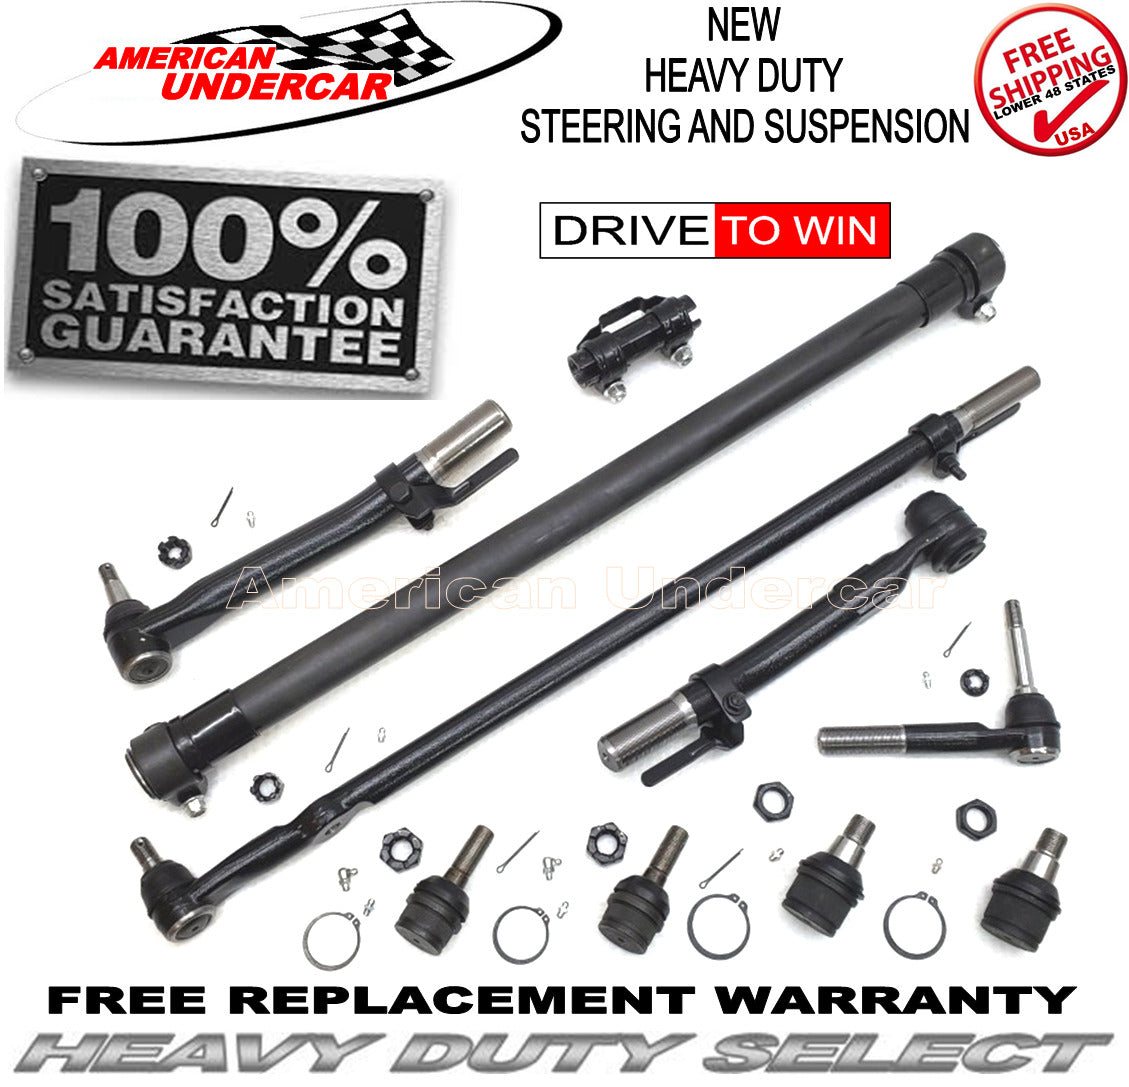 Ford F250 F350 4x4 08 - 10 HD Drag Link Tie Rod Ball Joint Sleeves Steering Kit